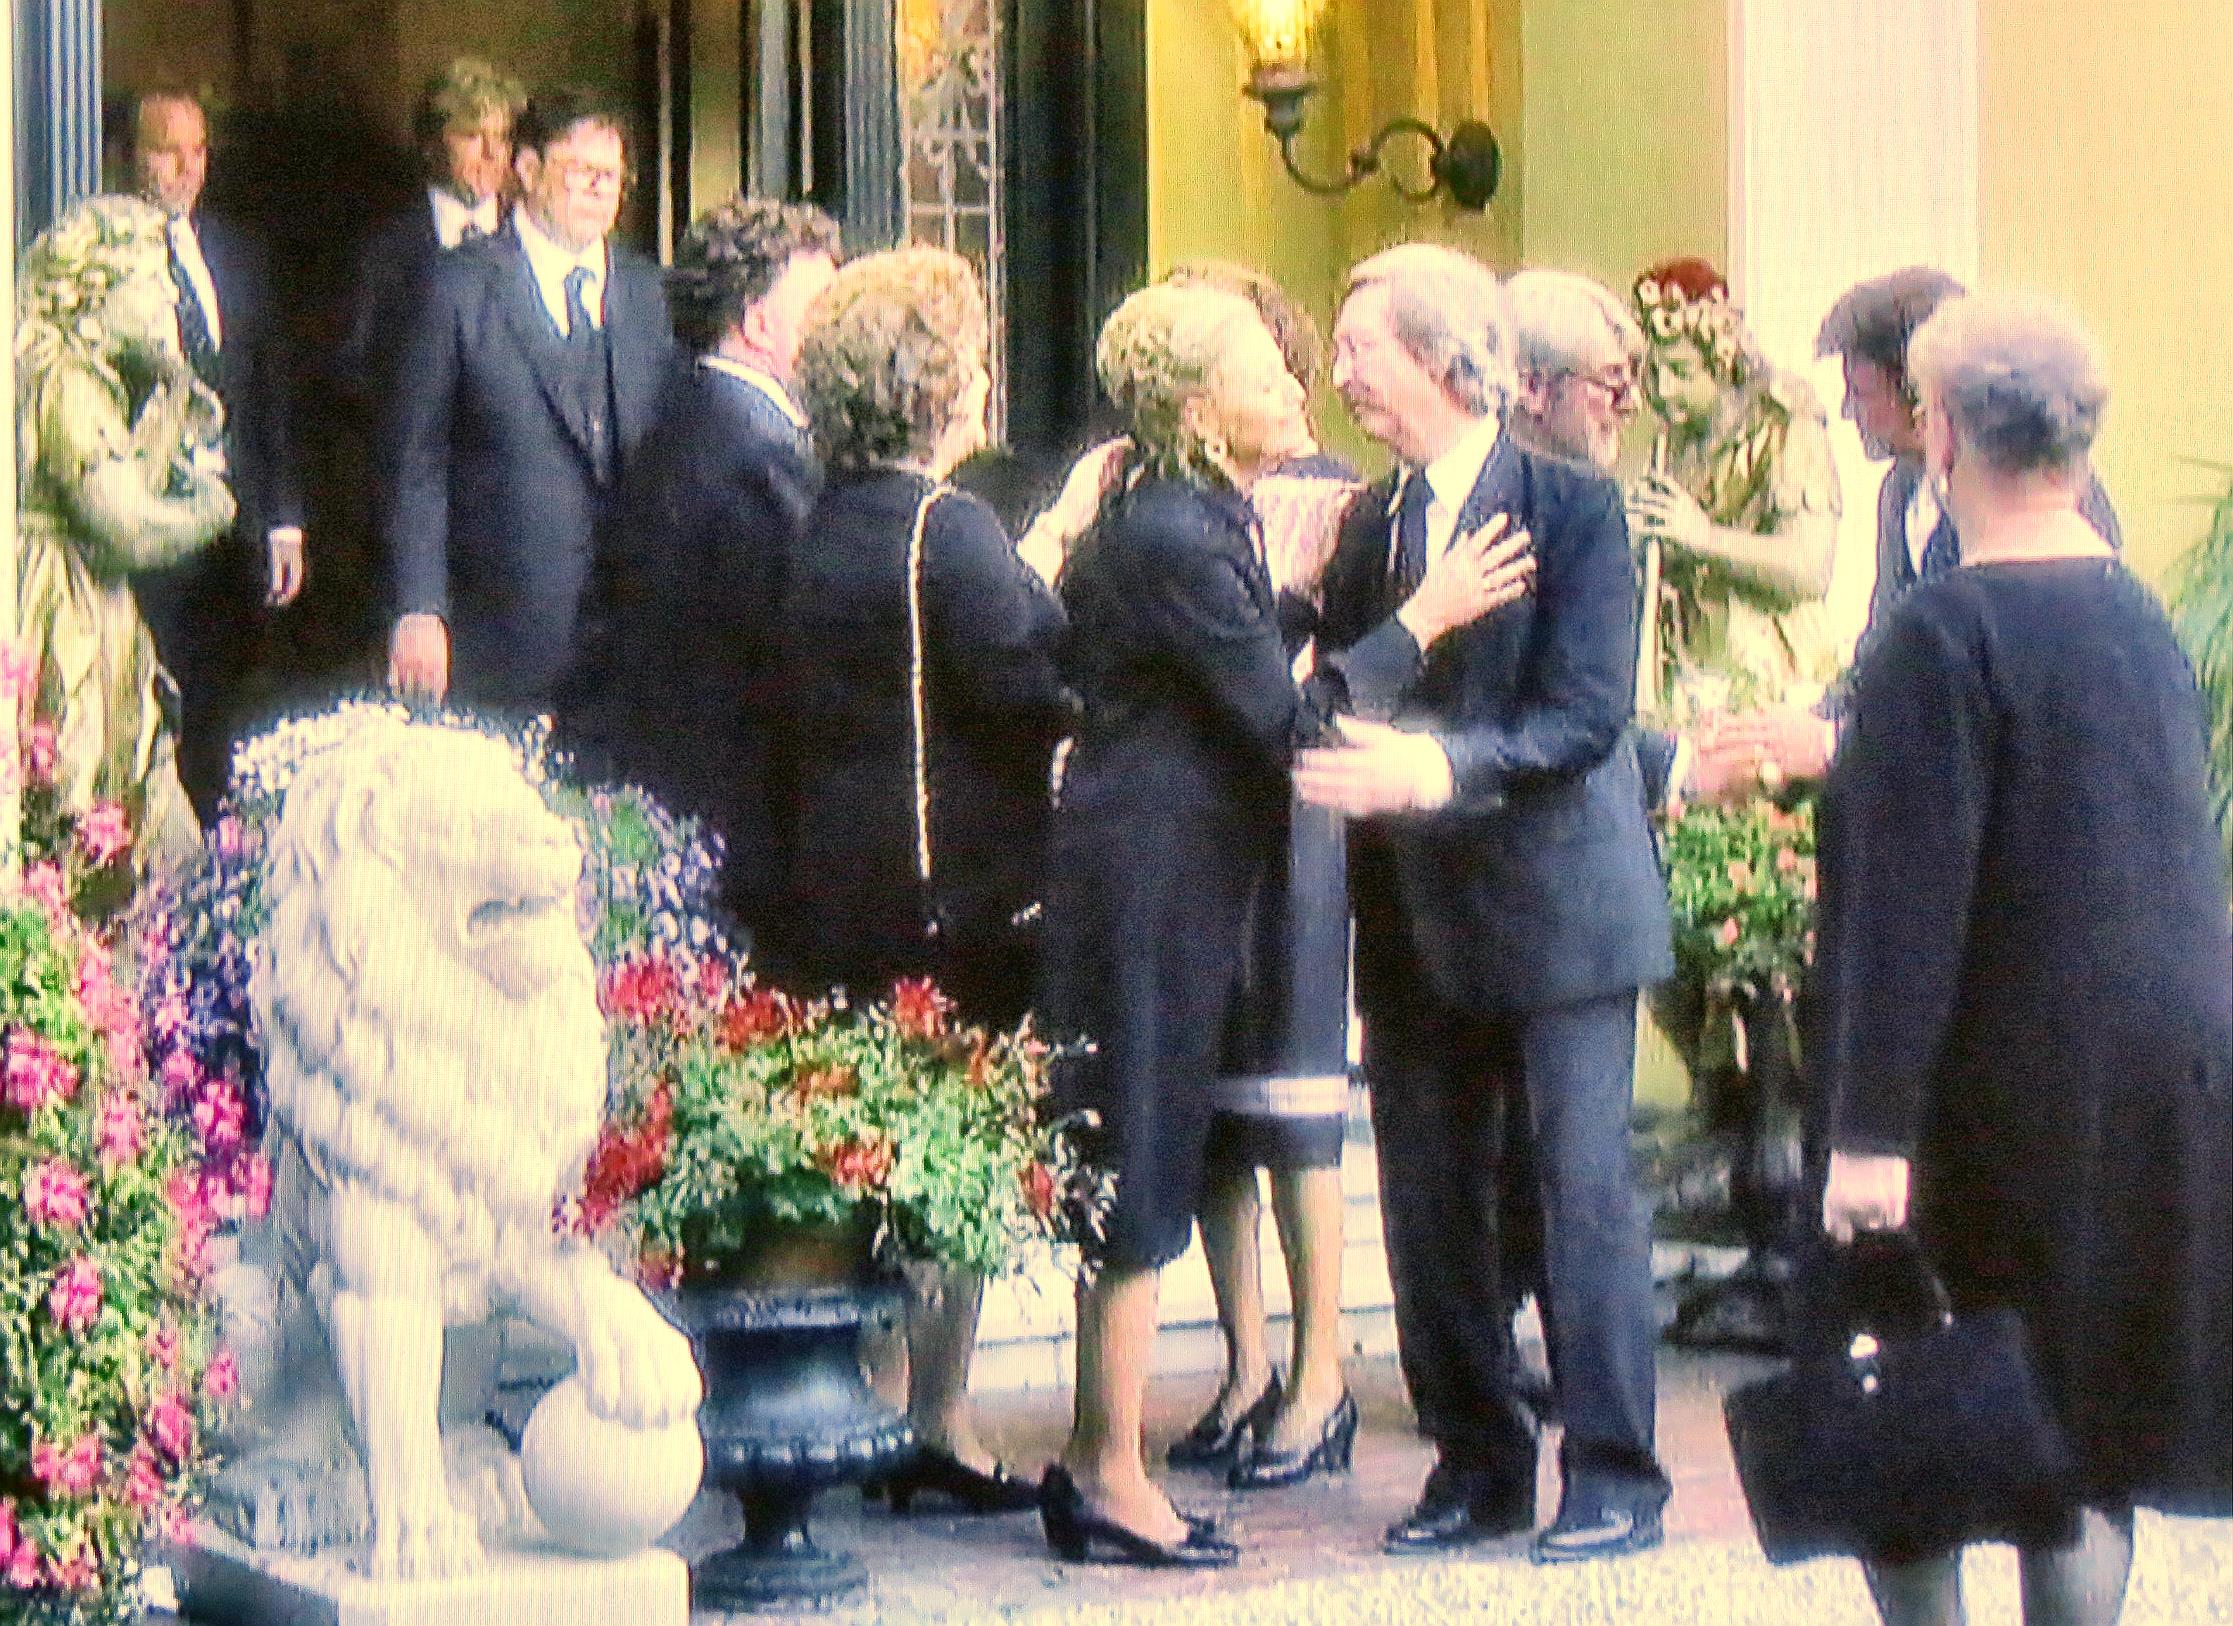 Funeral of Liberace's mother. I'm extending condolences to Liberace's sister.